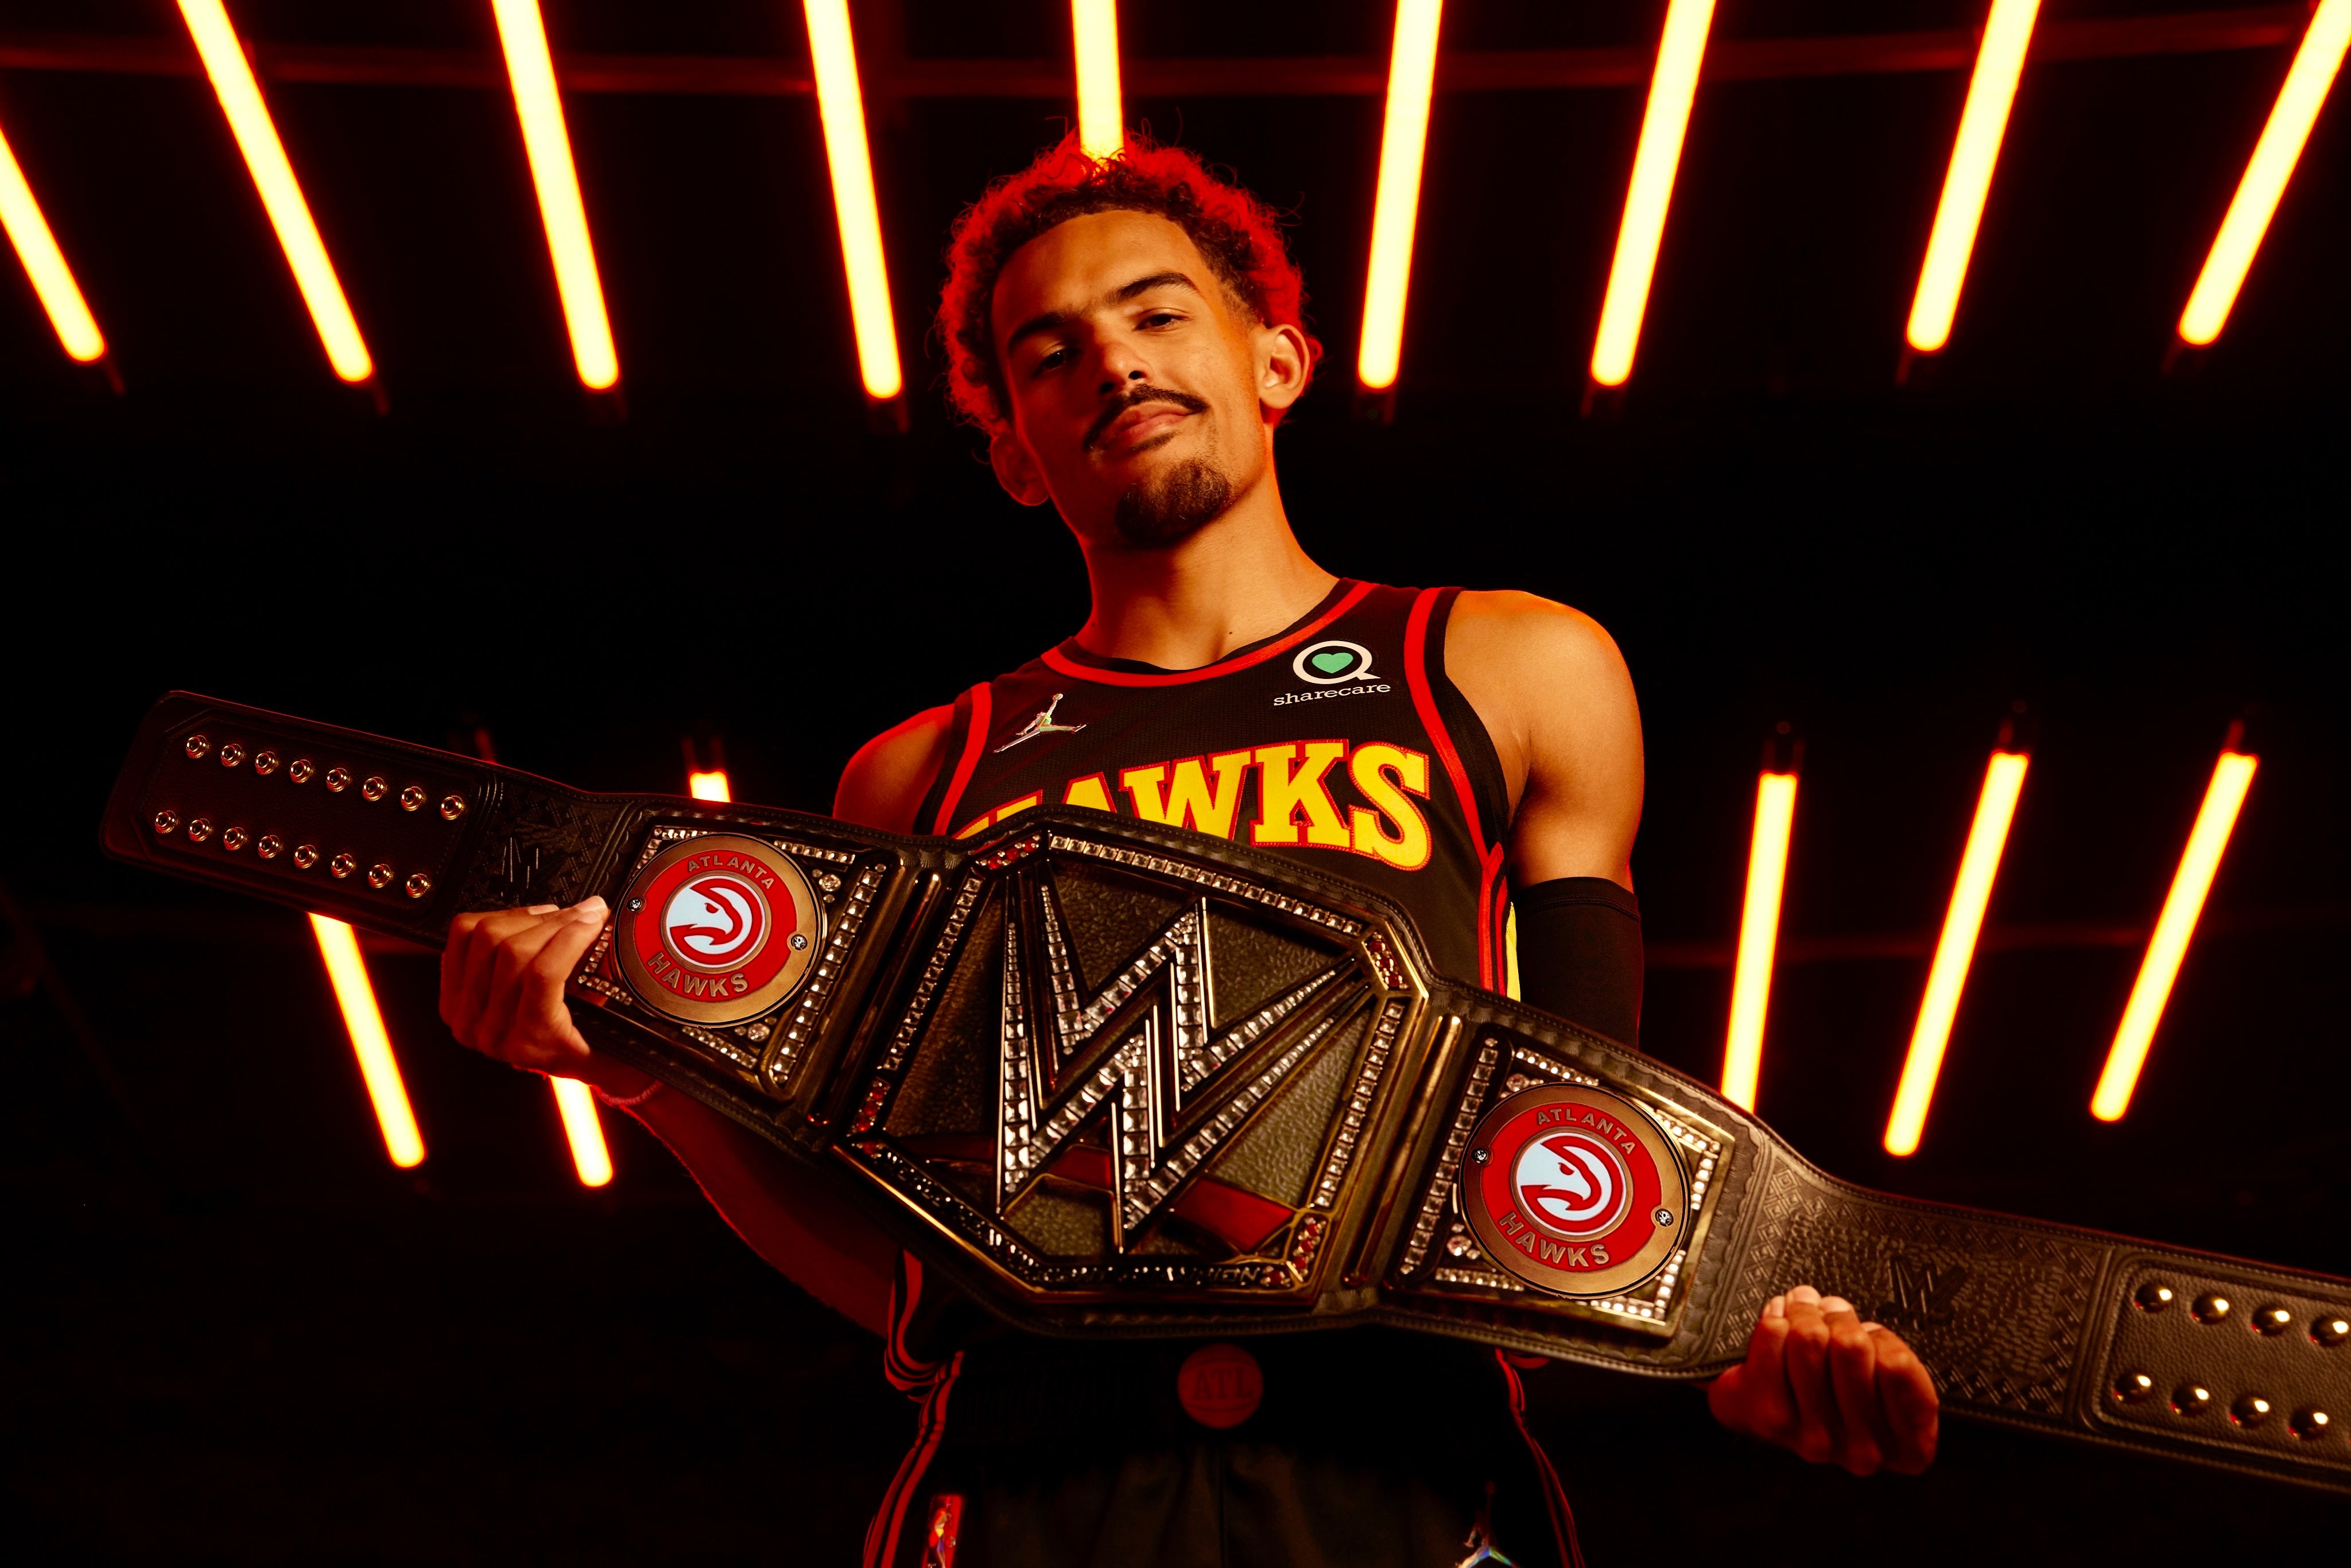 HAWKS AND WWE® TEAM UP TO CREATE LIMITED-EDITION CUSTOM TITLE BELTS AND MERCHANDISE